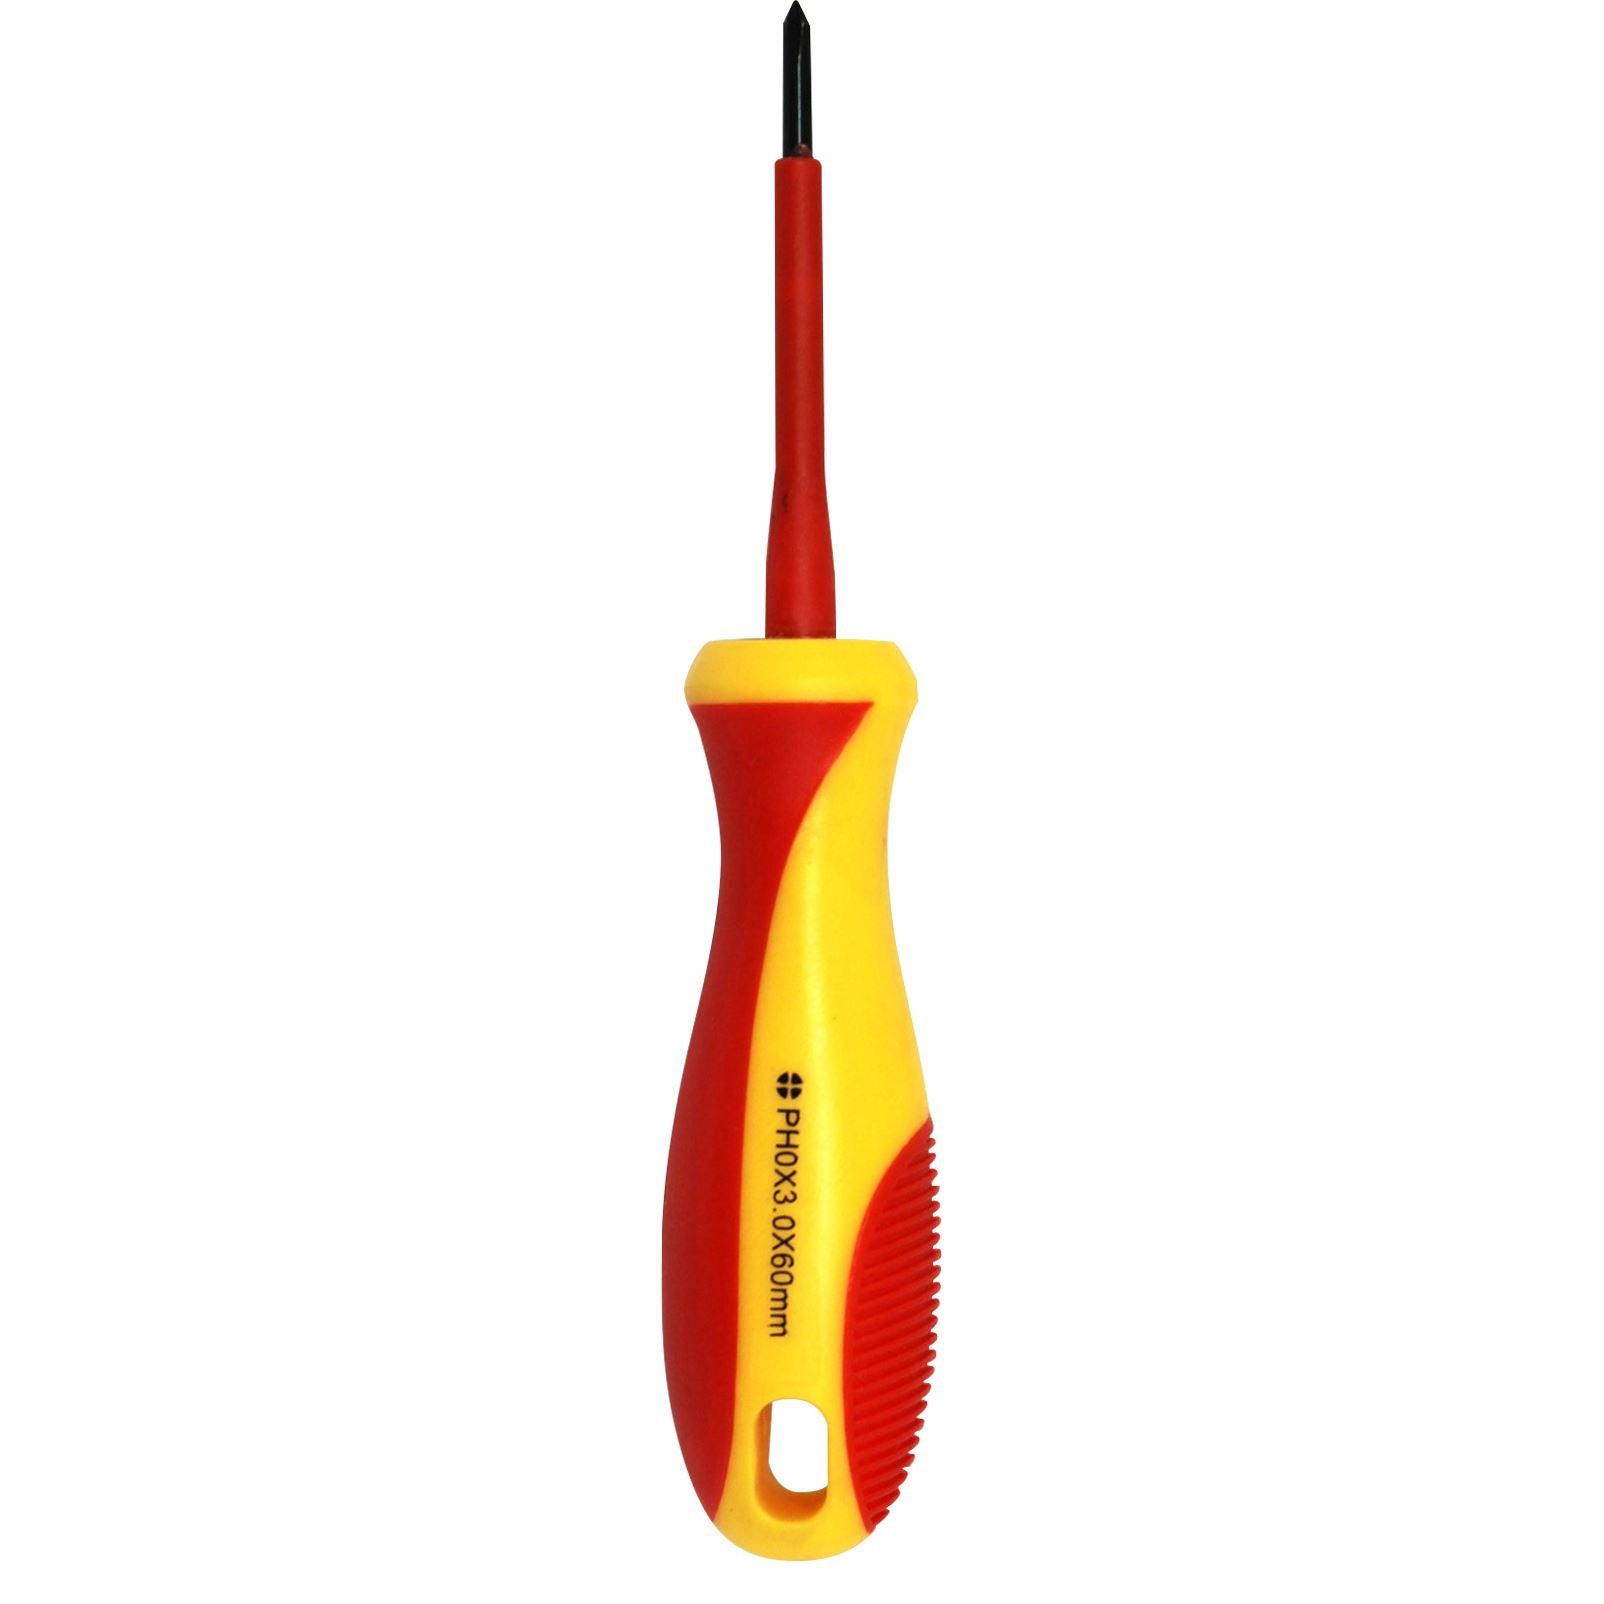 GOLDTOOL_60mm_Electrical_Insulated_VDE_Screwdriver._Tested_to_1000_Volts_AC._(PH0*60mm)._Yellow/Red_Colour_Handle